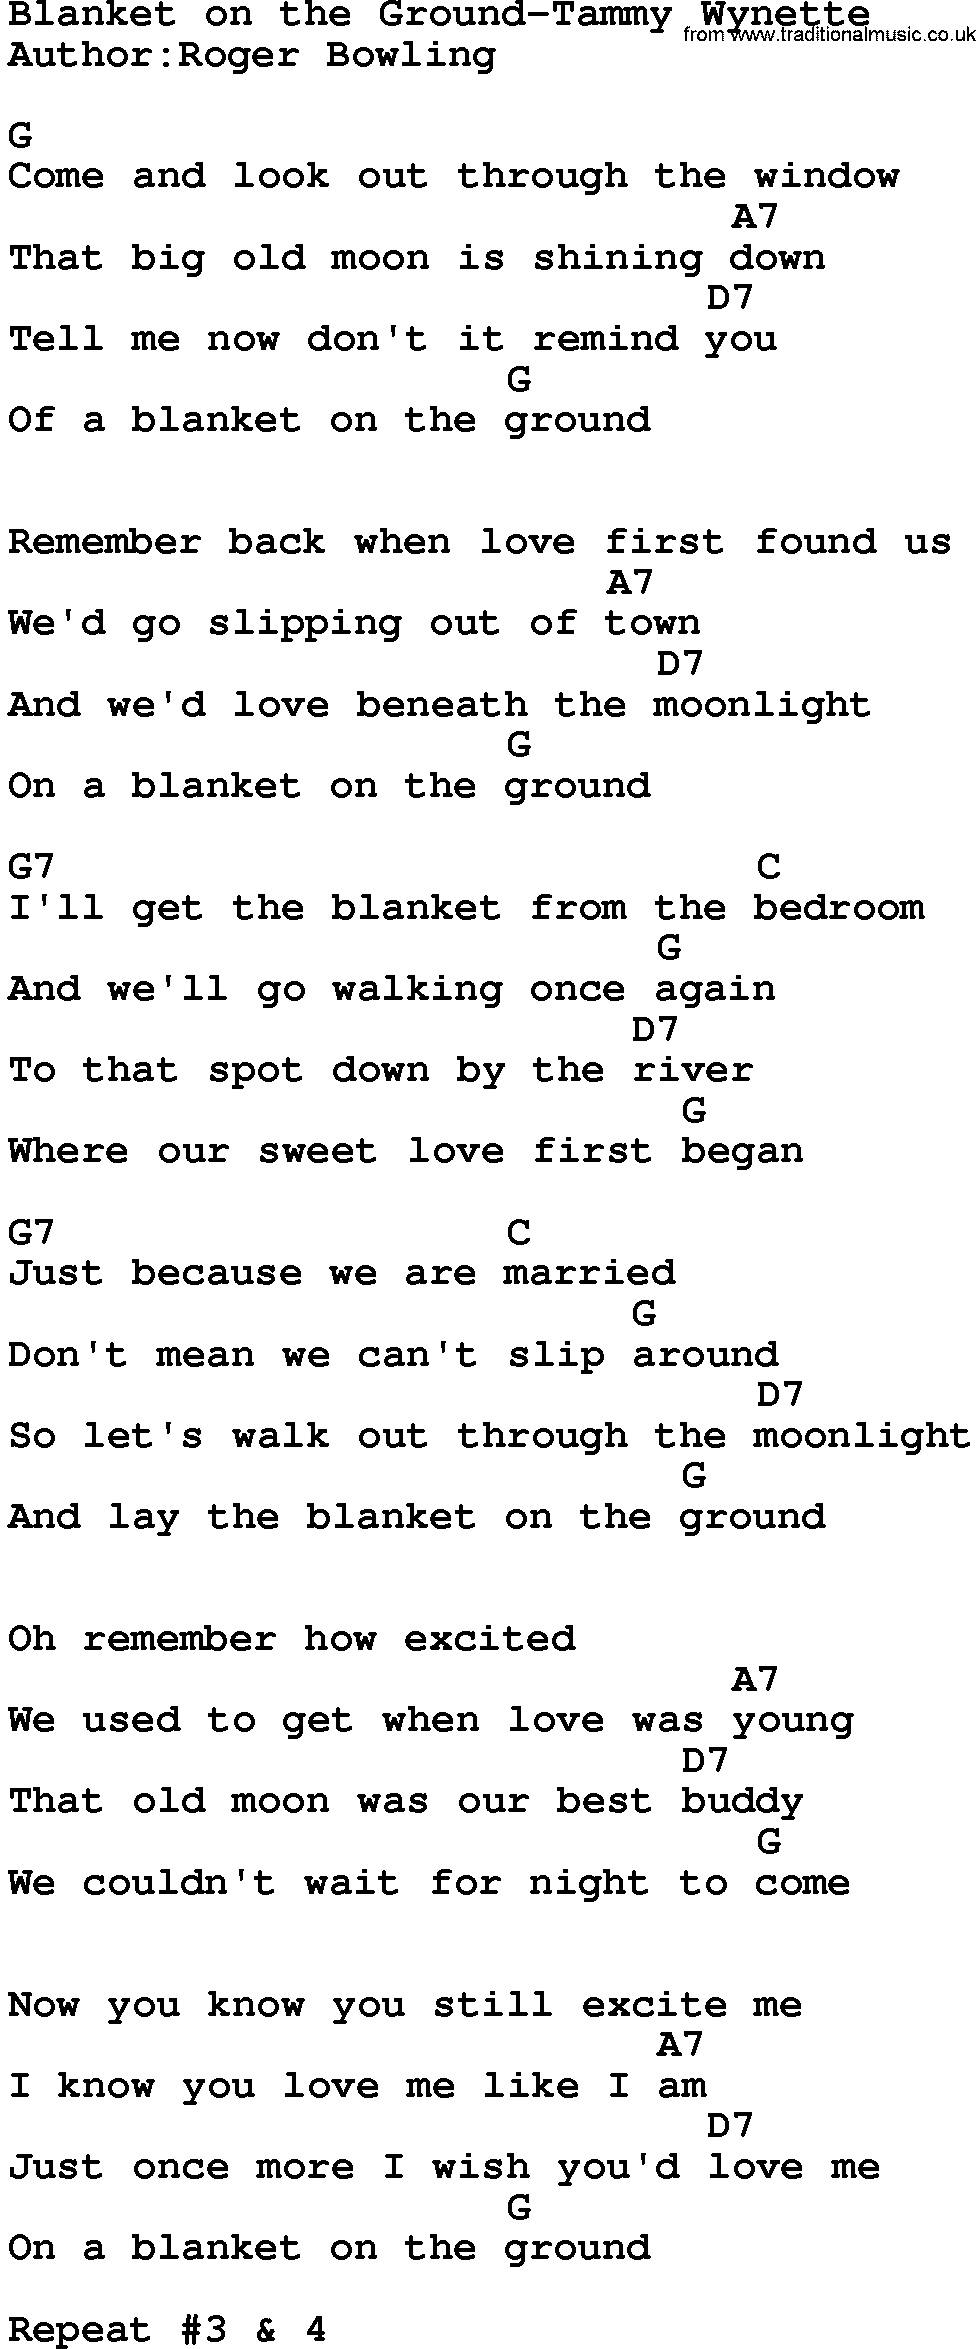 Country music song: Blanket On The Ground-Tammy Wynette lyrics and chords